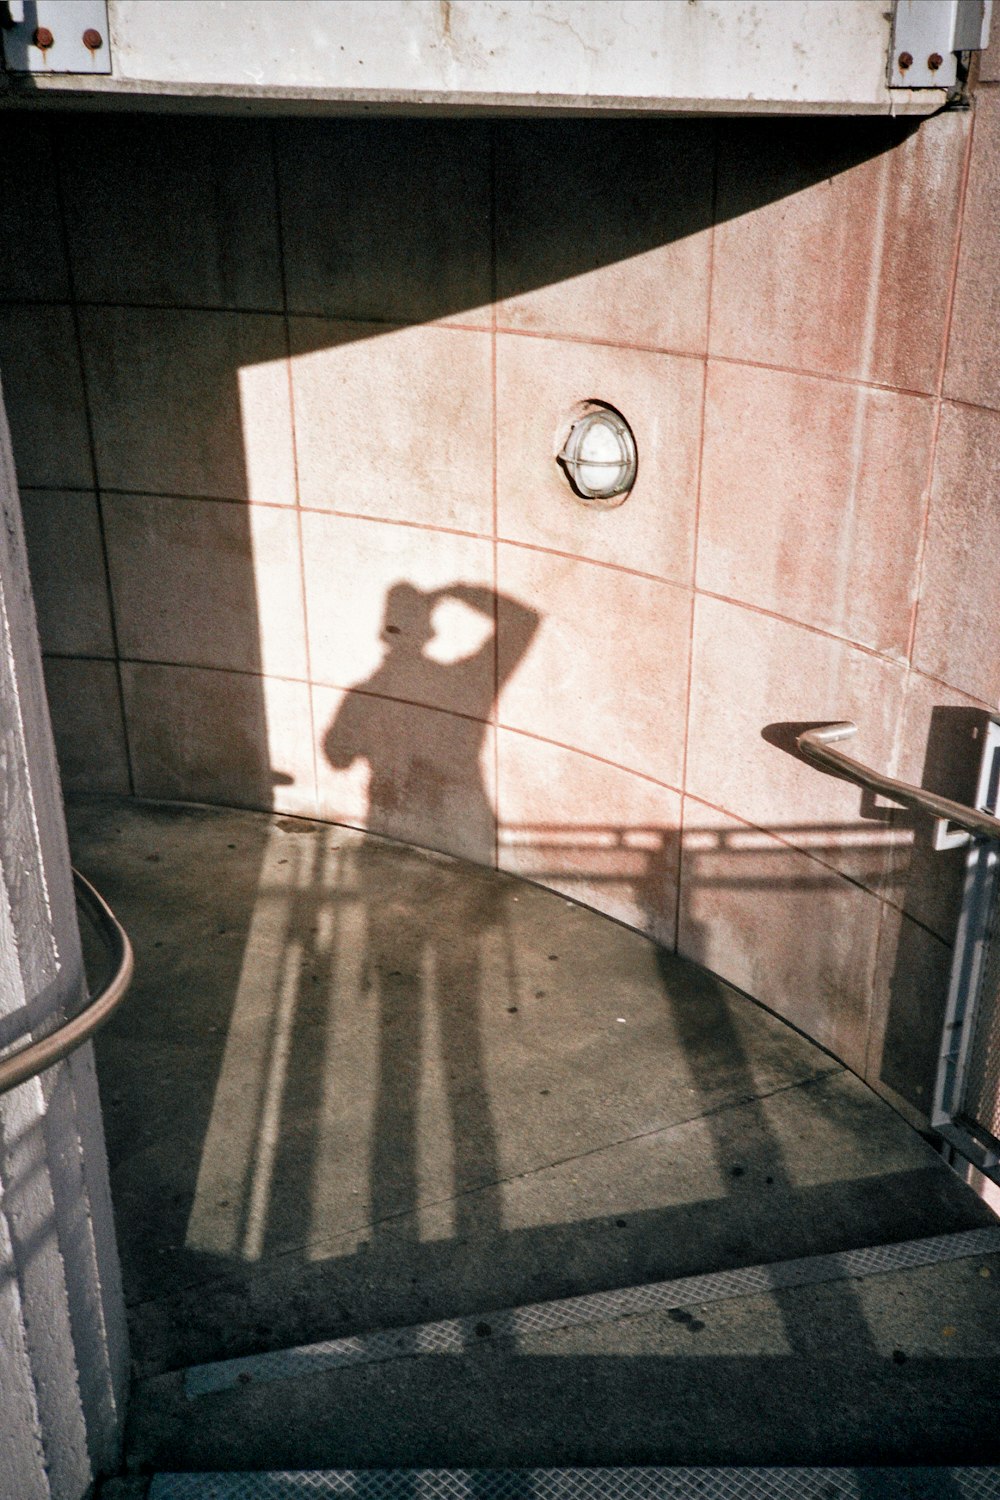 a shadow of a person on a tile floor